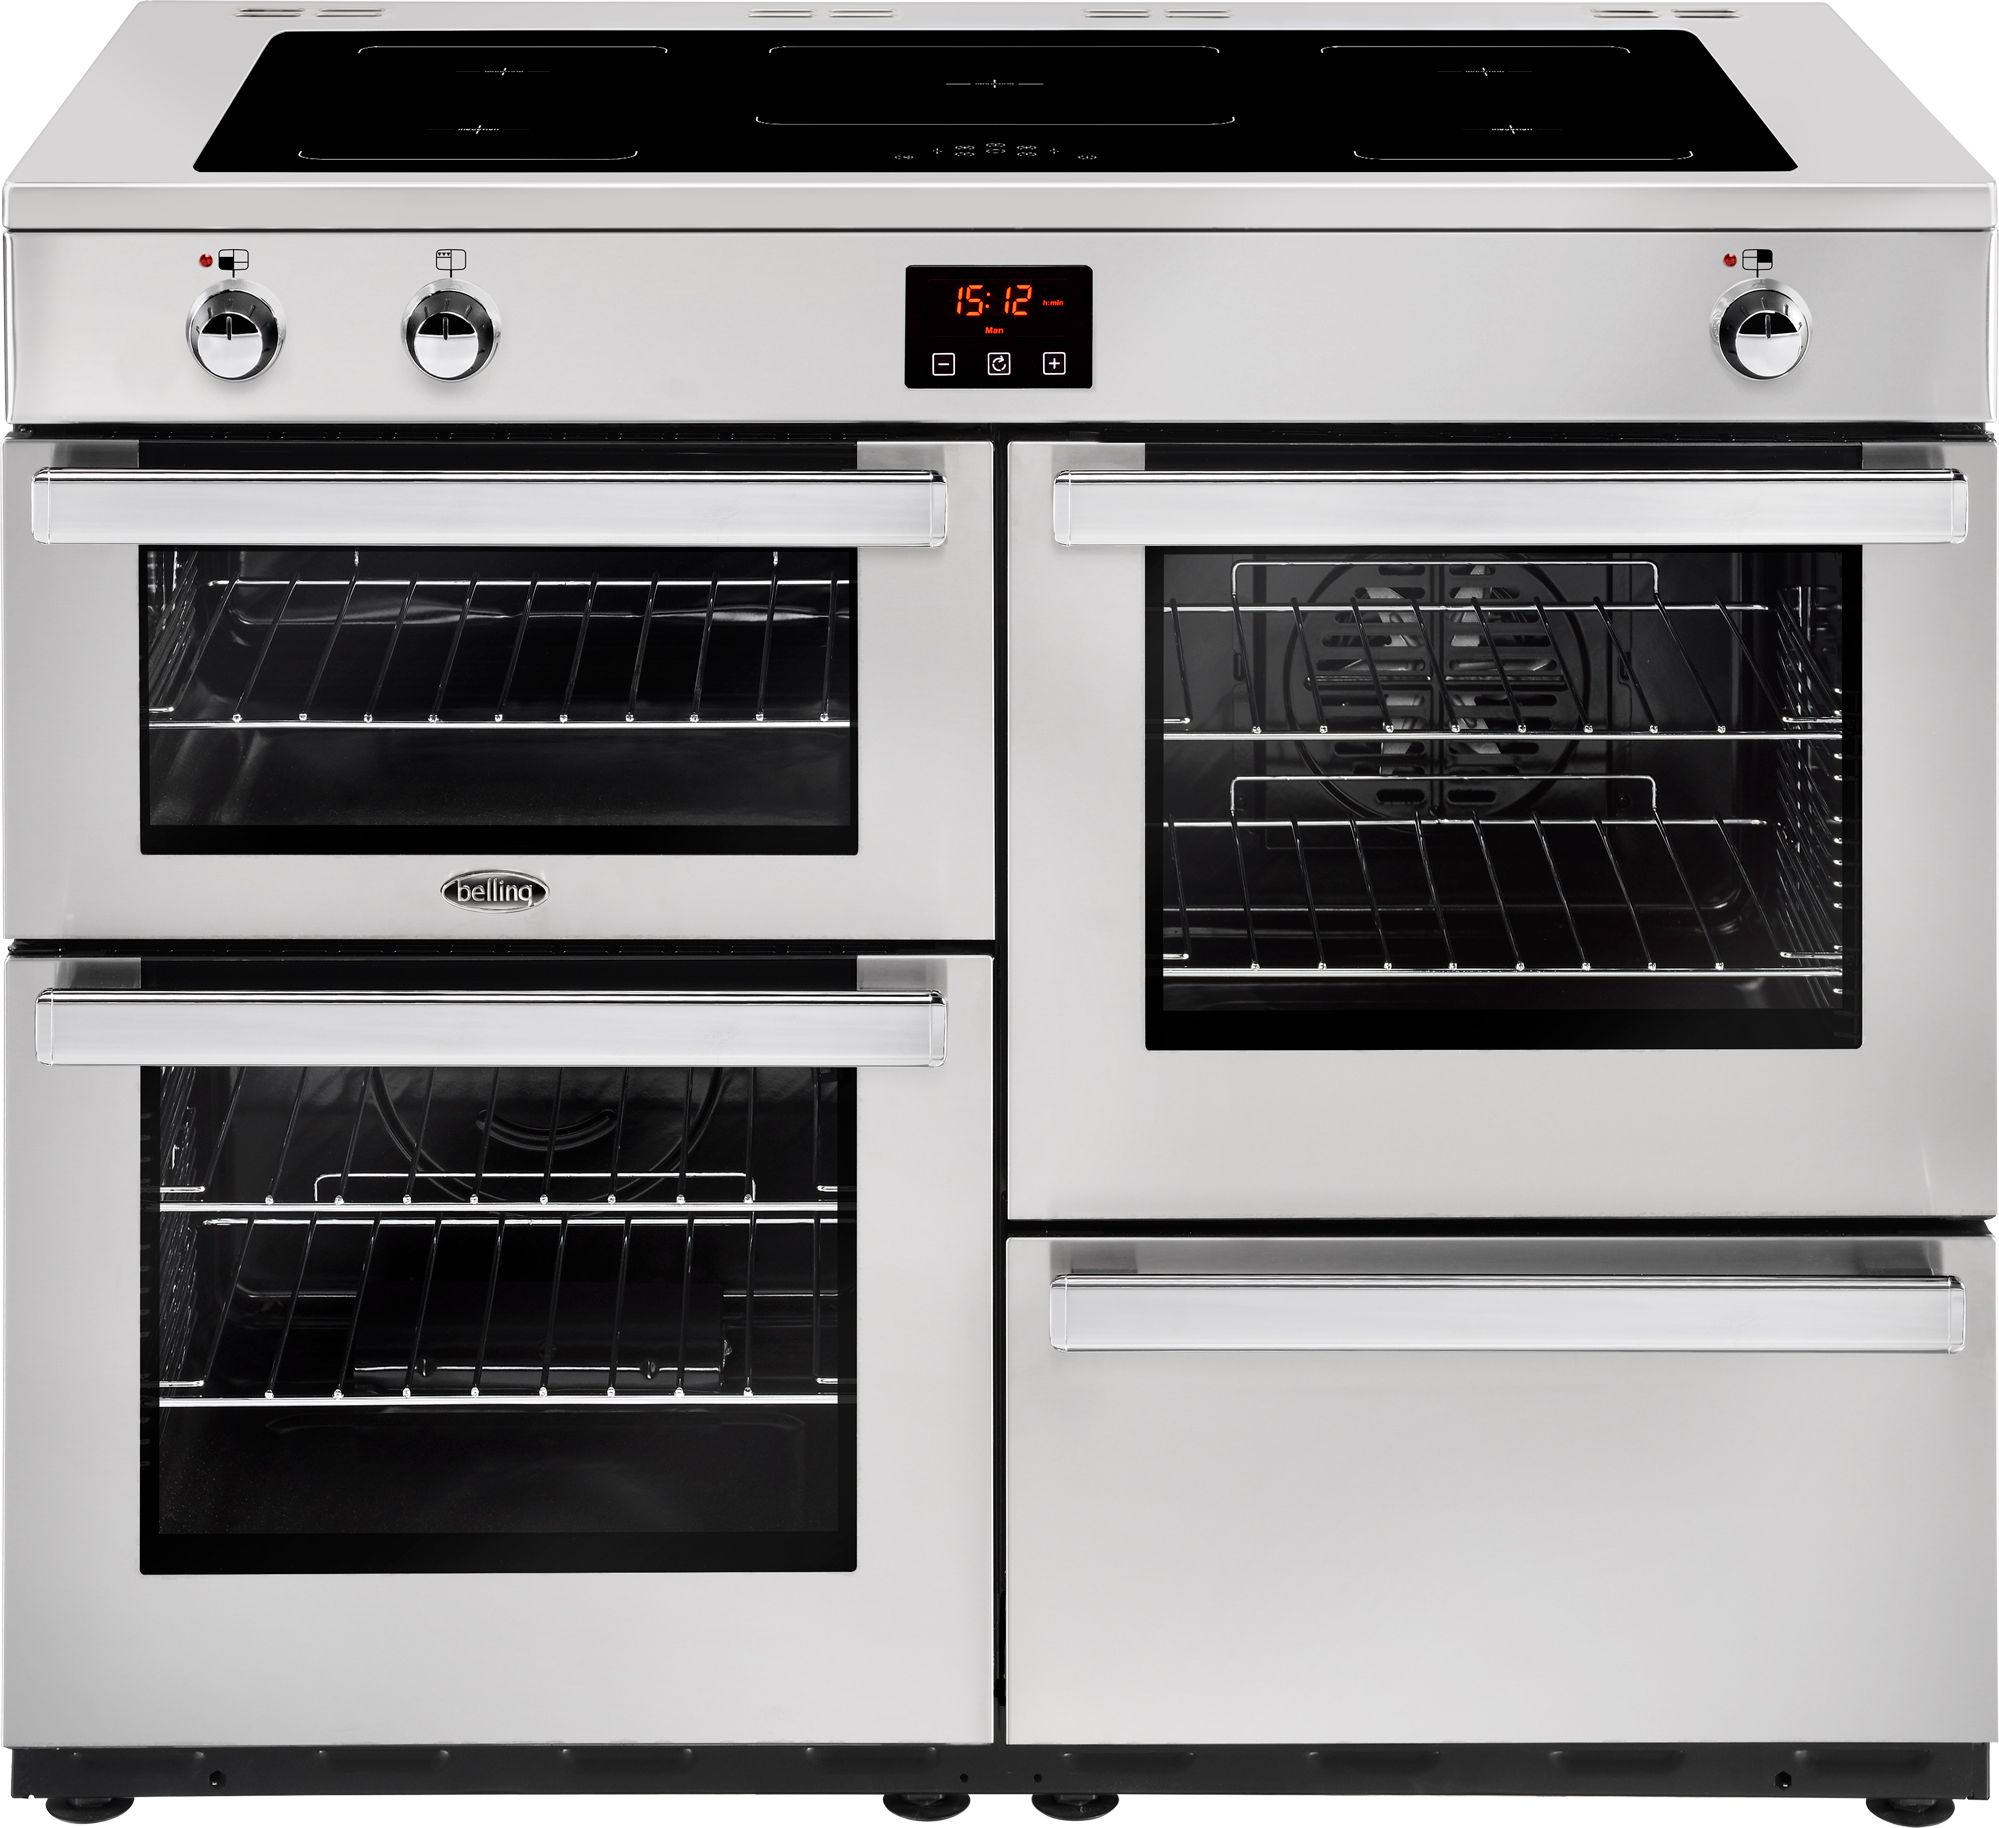 Belling Cookcentre110Ei Prof 110cm Electric Range Cooker with Induction Hob - Stainless Steel - A/A Rated, Stainless Steel